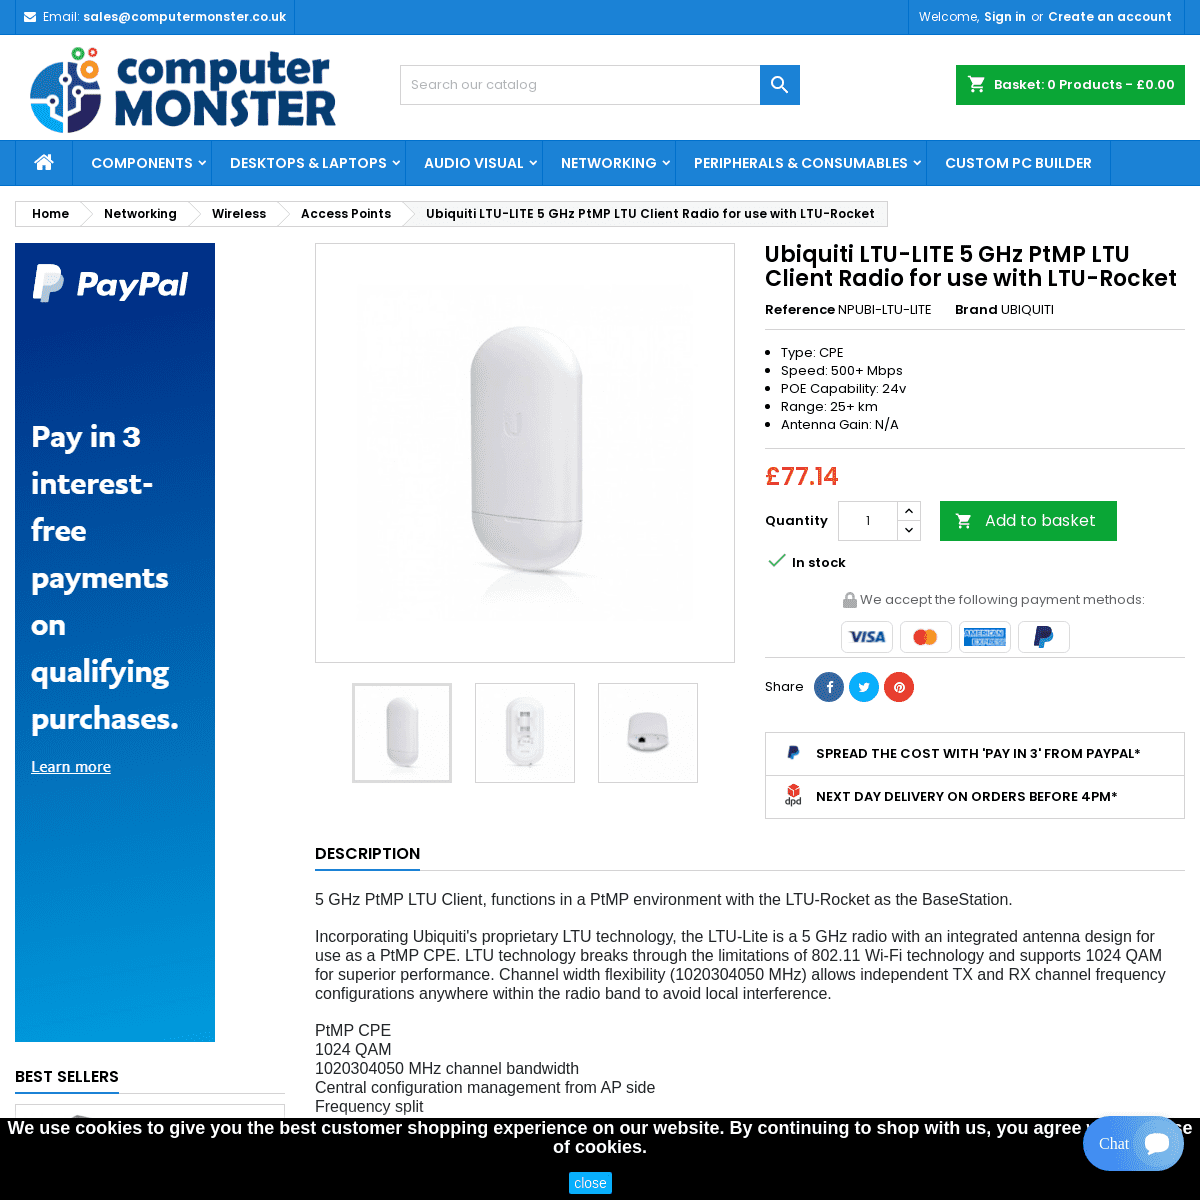 A complete backup of https://computermonster.co.uk/access-points/102-ubiquiti-ltu-lite-5-ghz-ptmp-ltu-client-radio-for-use-with-